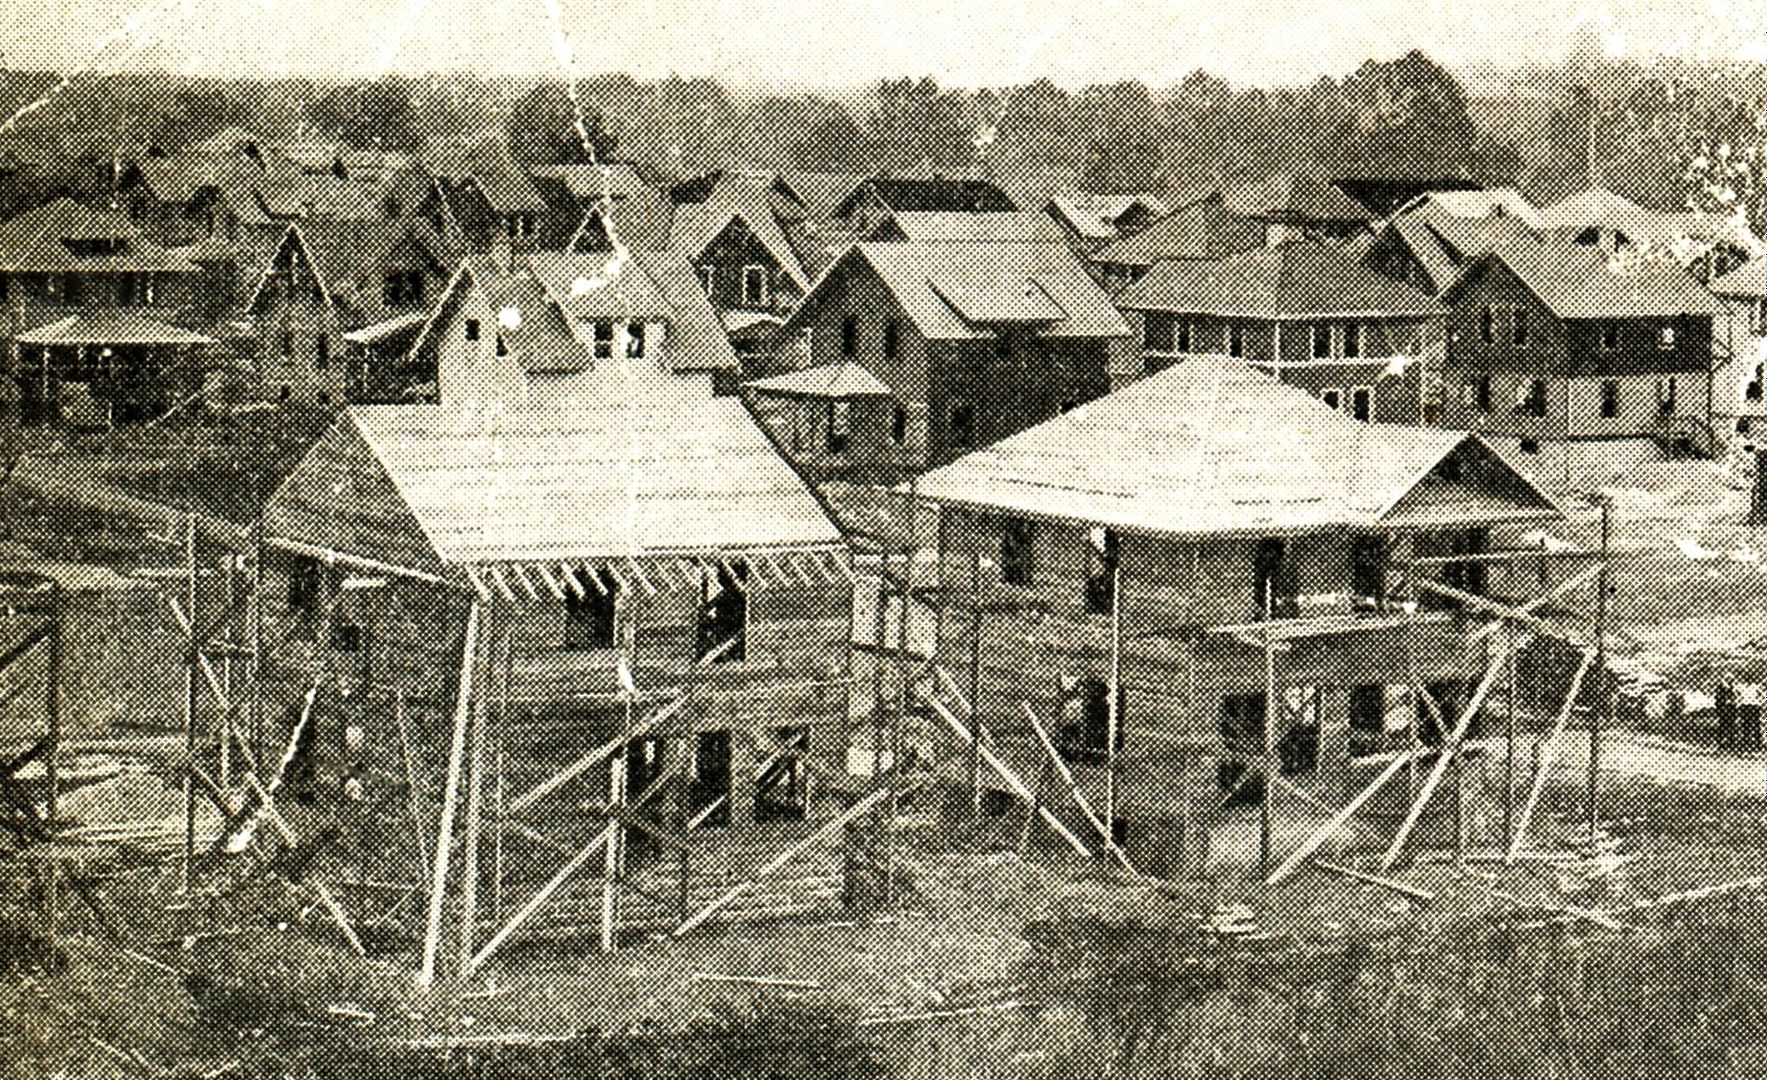 Carlinville under construction, about 1918.